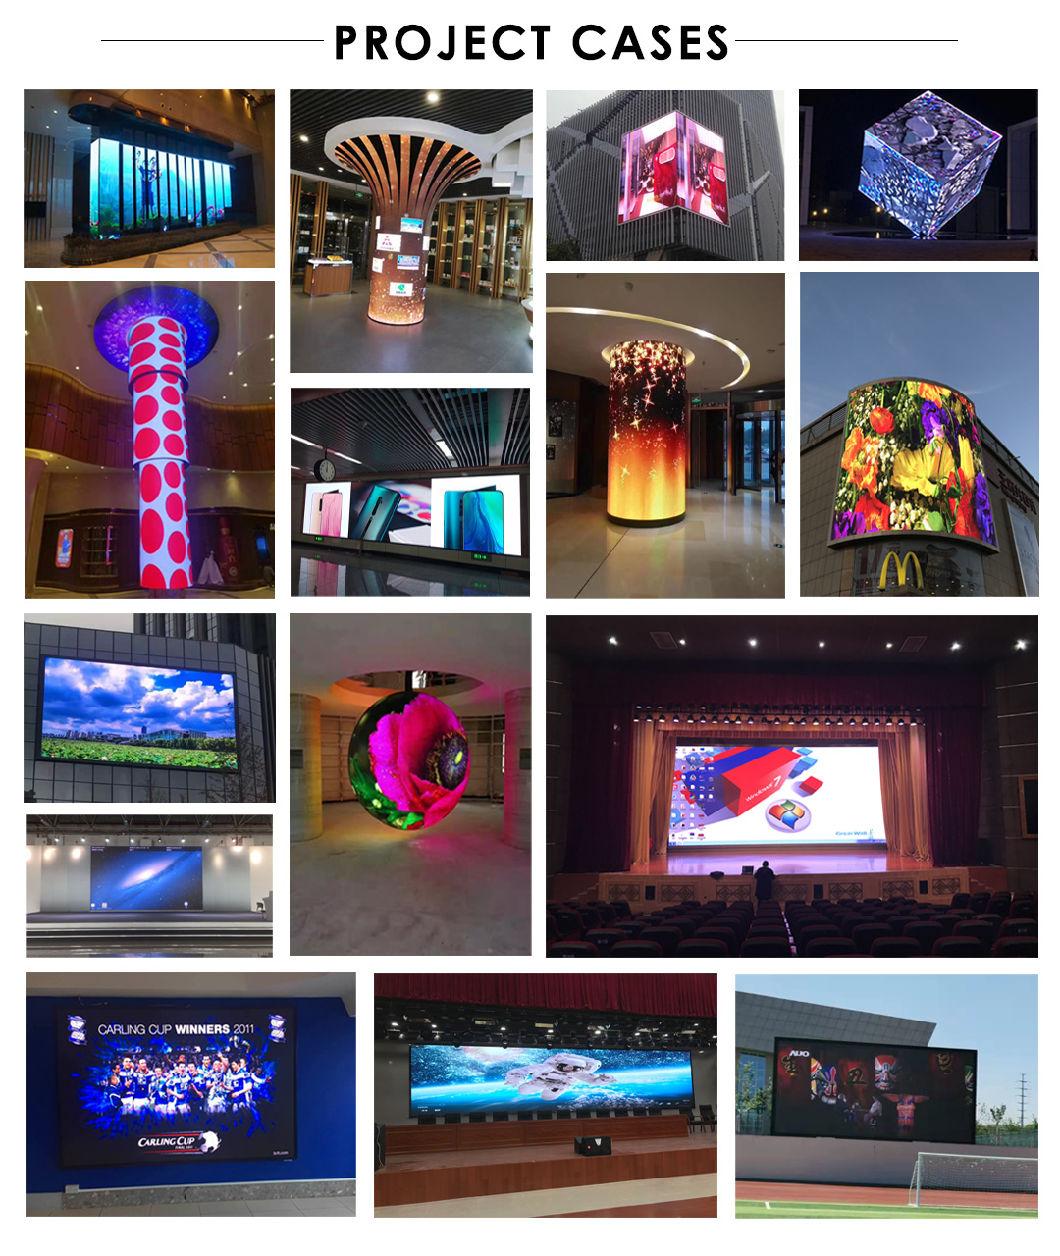 HD Indoor Full Color LED Display with Long Life LED SMD Lamp